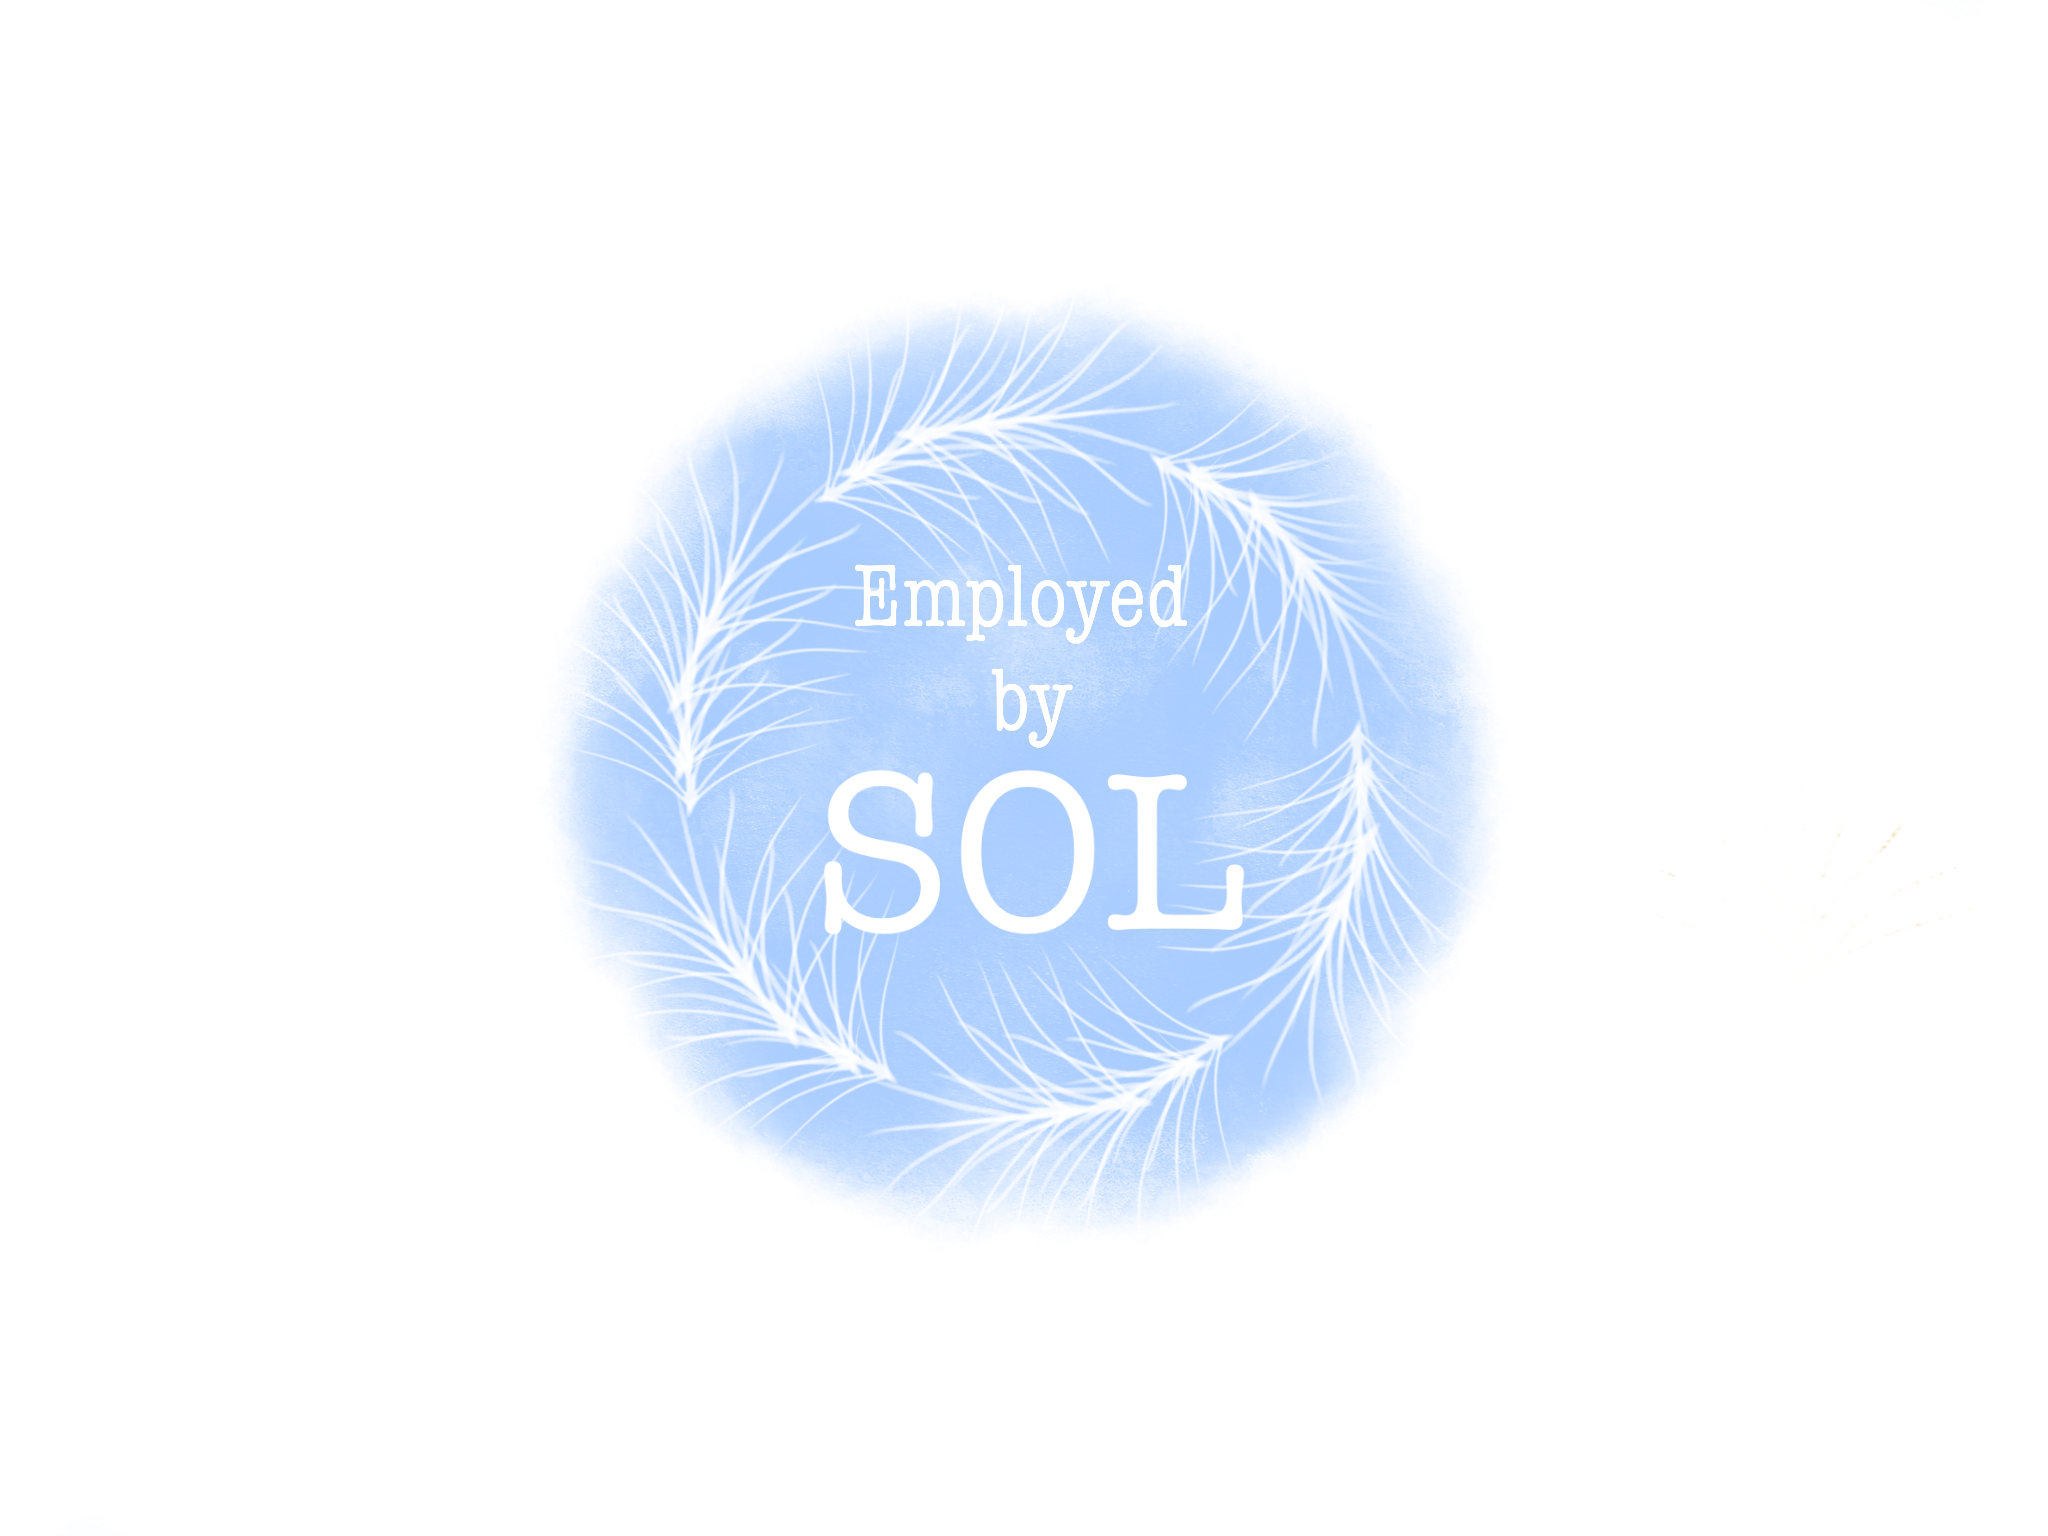 Employed_by_Sol